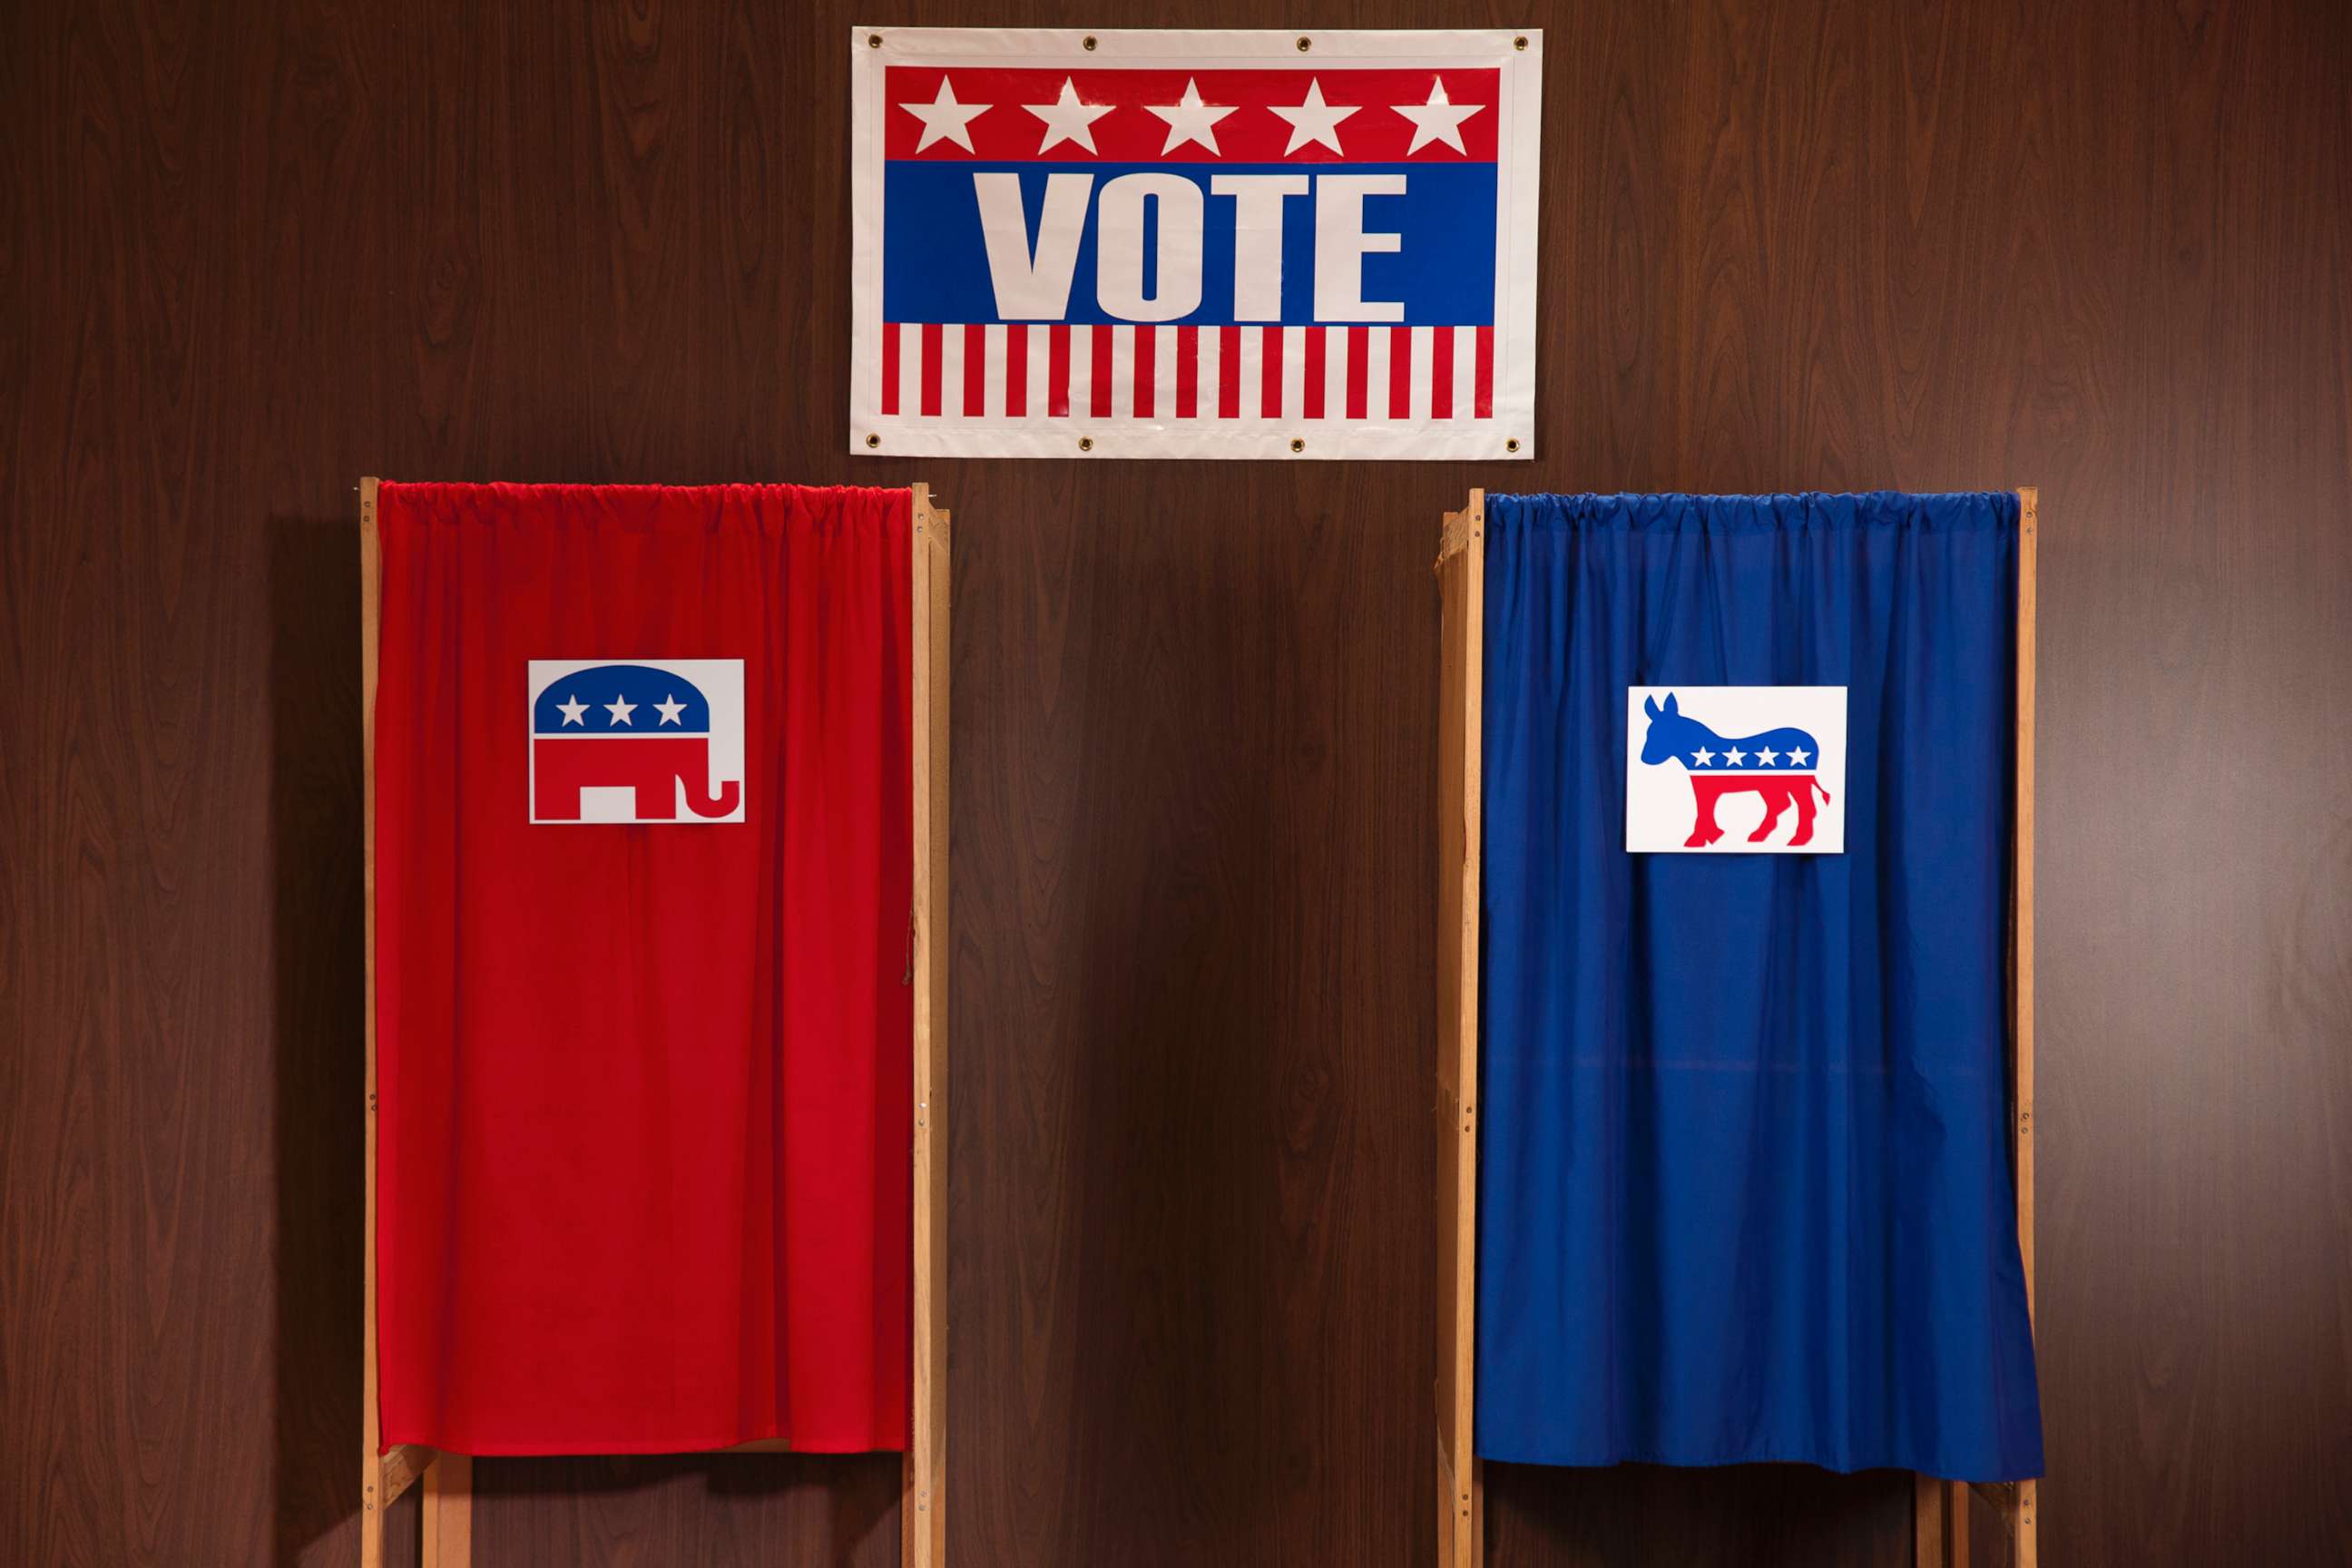 PHOTO: Voting booths are pictured at a polling place in this undated stock photo.